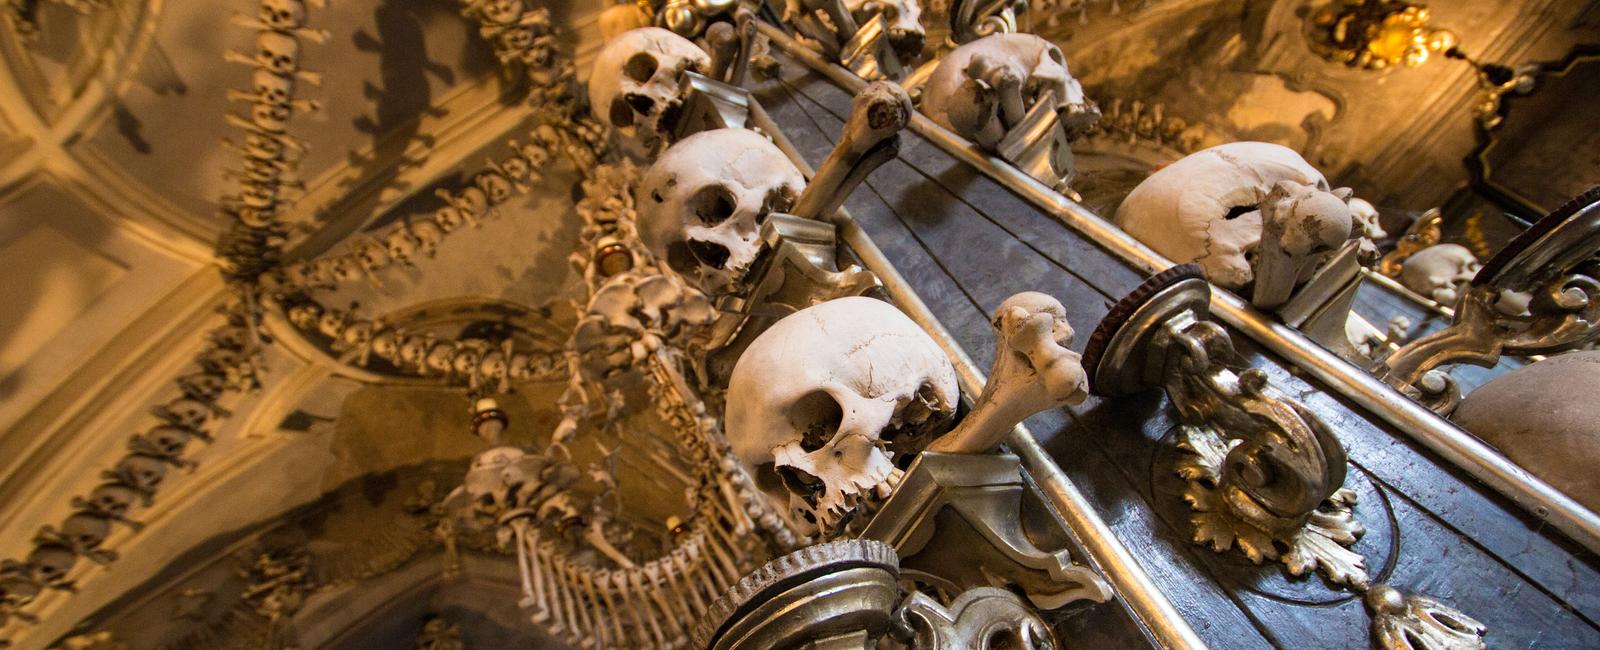 In the czech republic there is a church that is decorated with the bones of 10 000 dead people